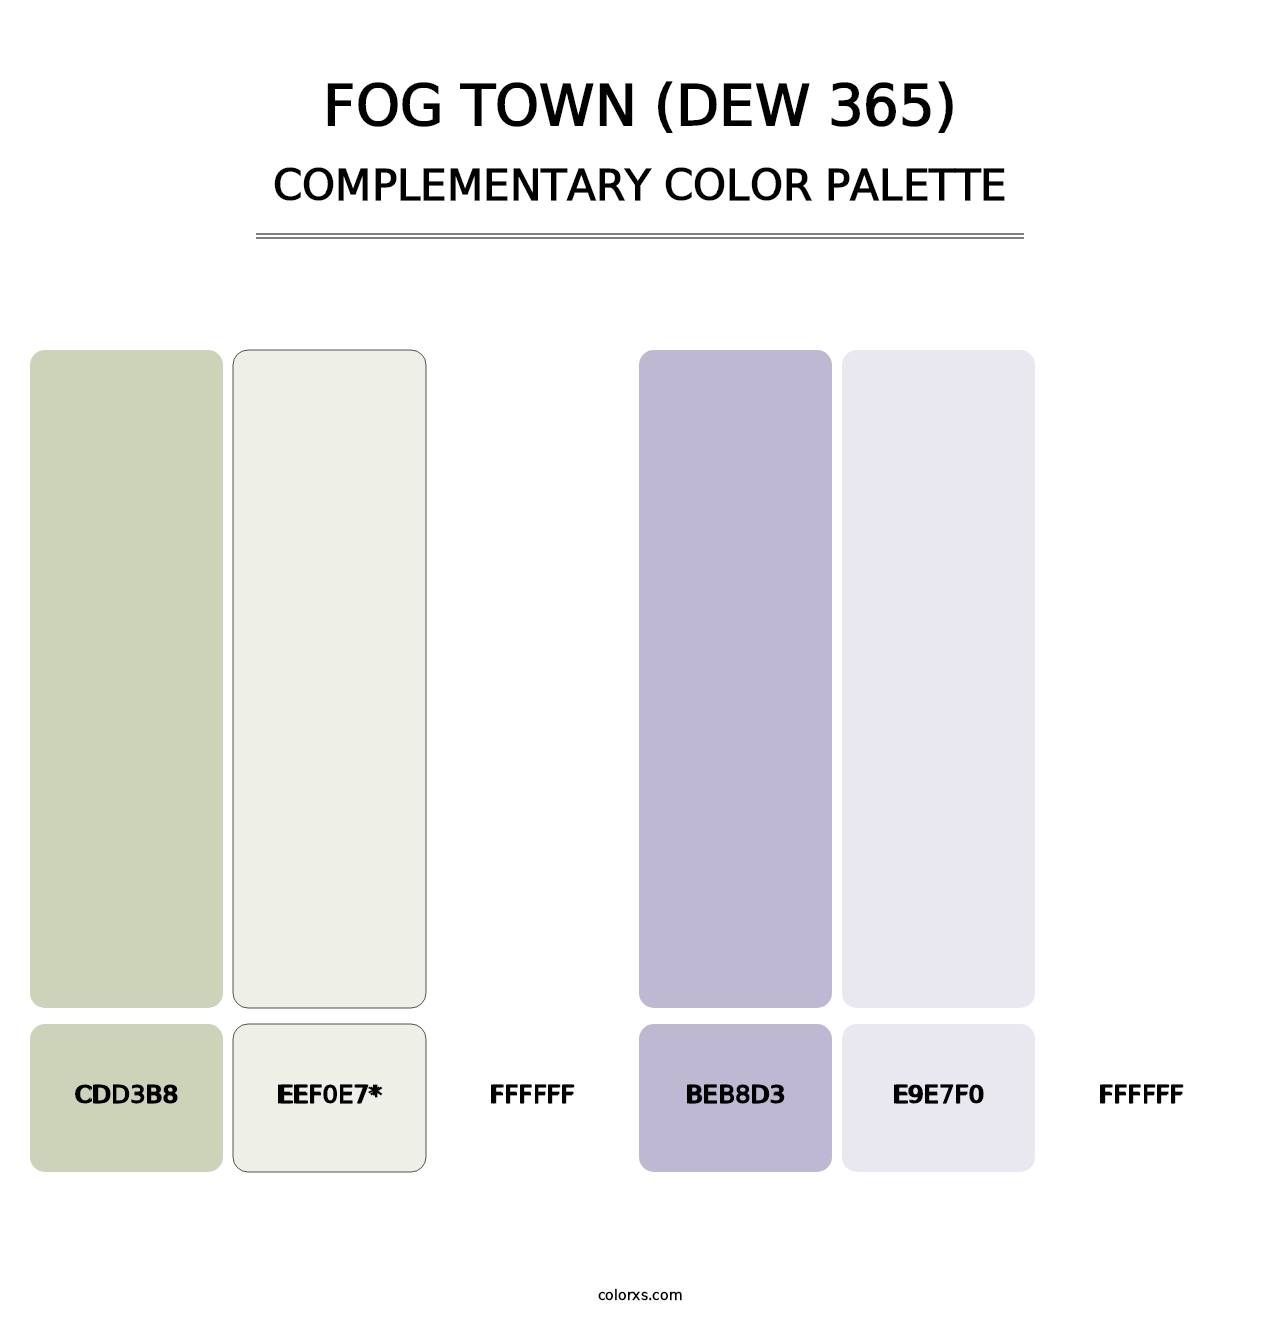 Fog Town (DEW 365) - Complementary Color Palette